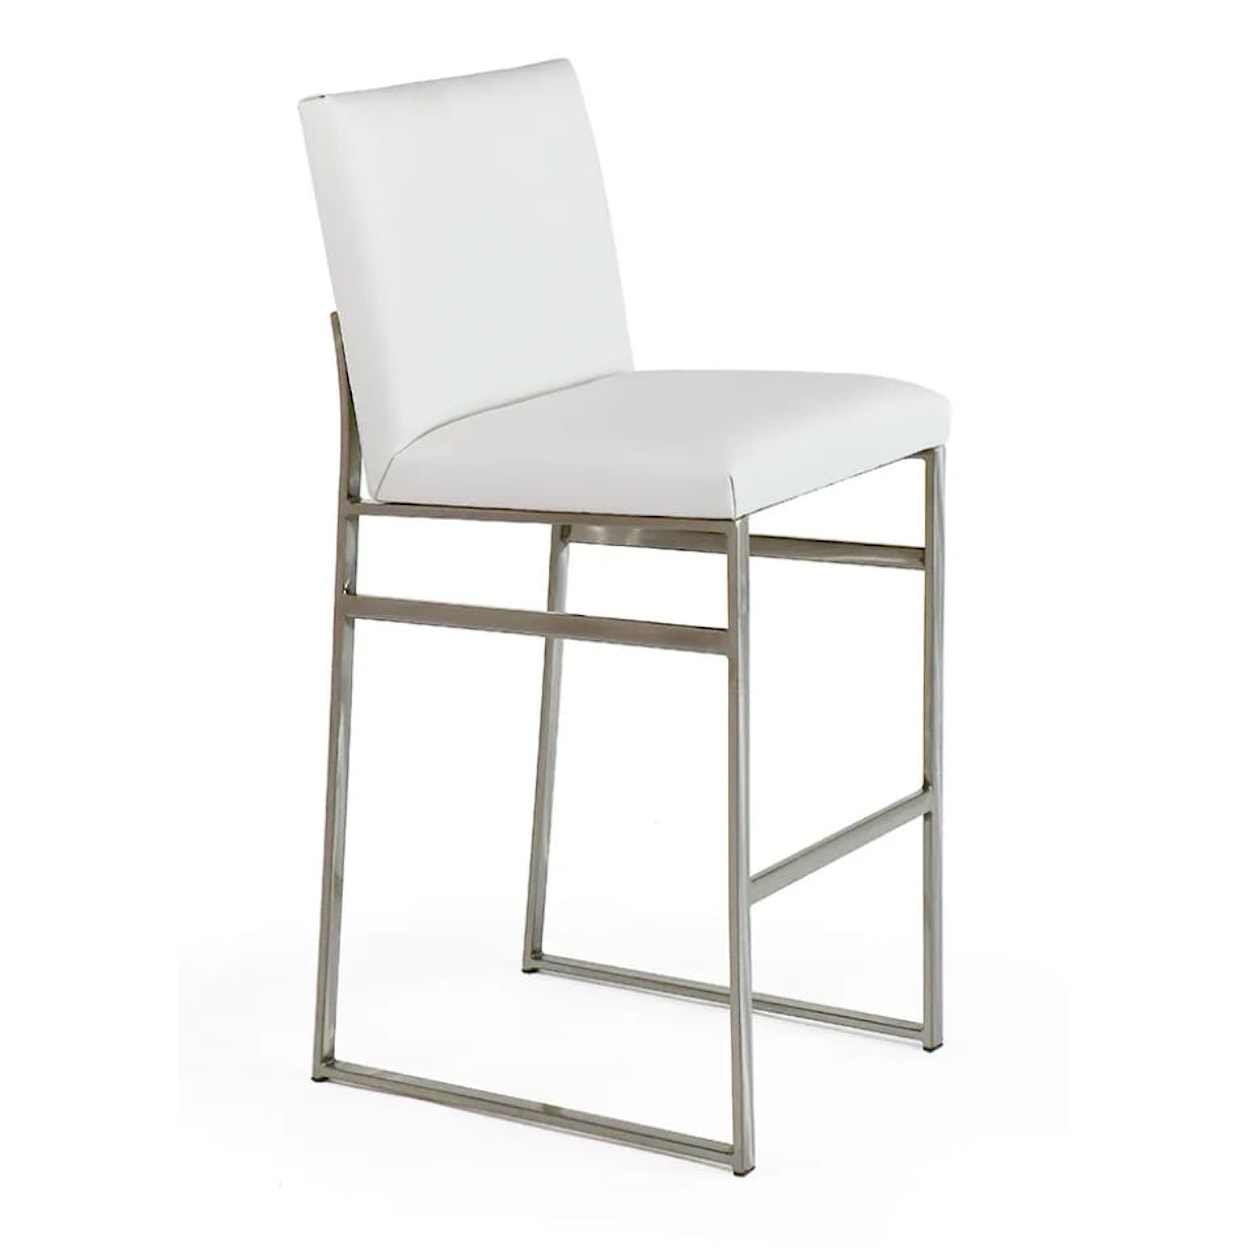 Johnston Casuals Stools and Accessories Harper Bar Stool